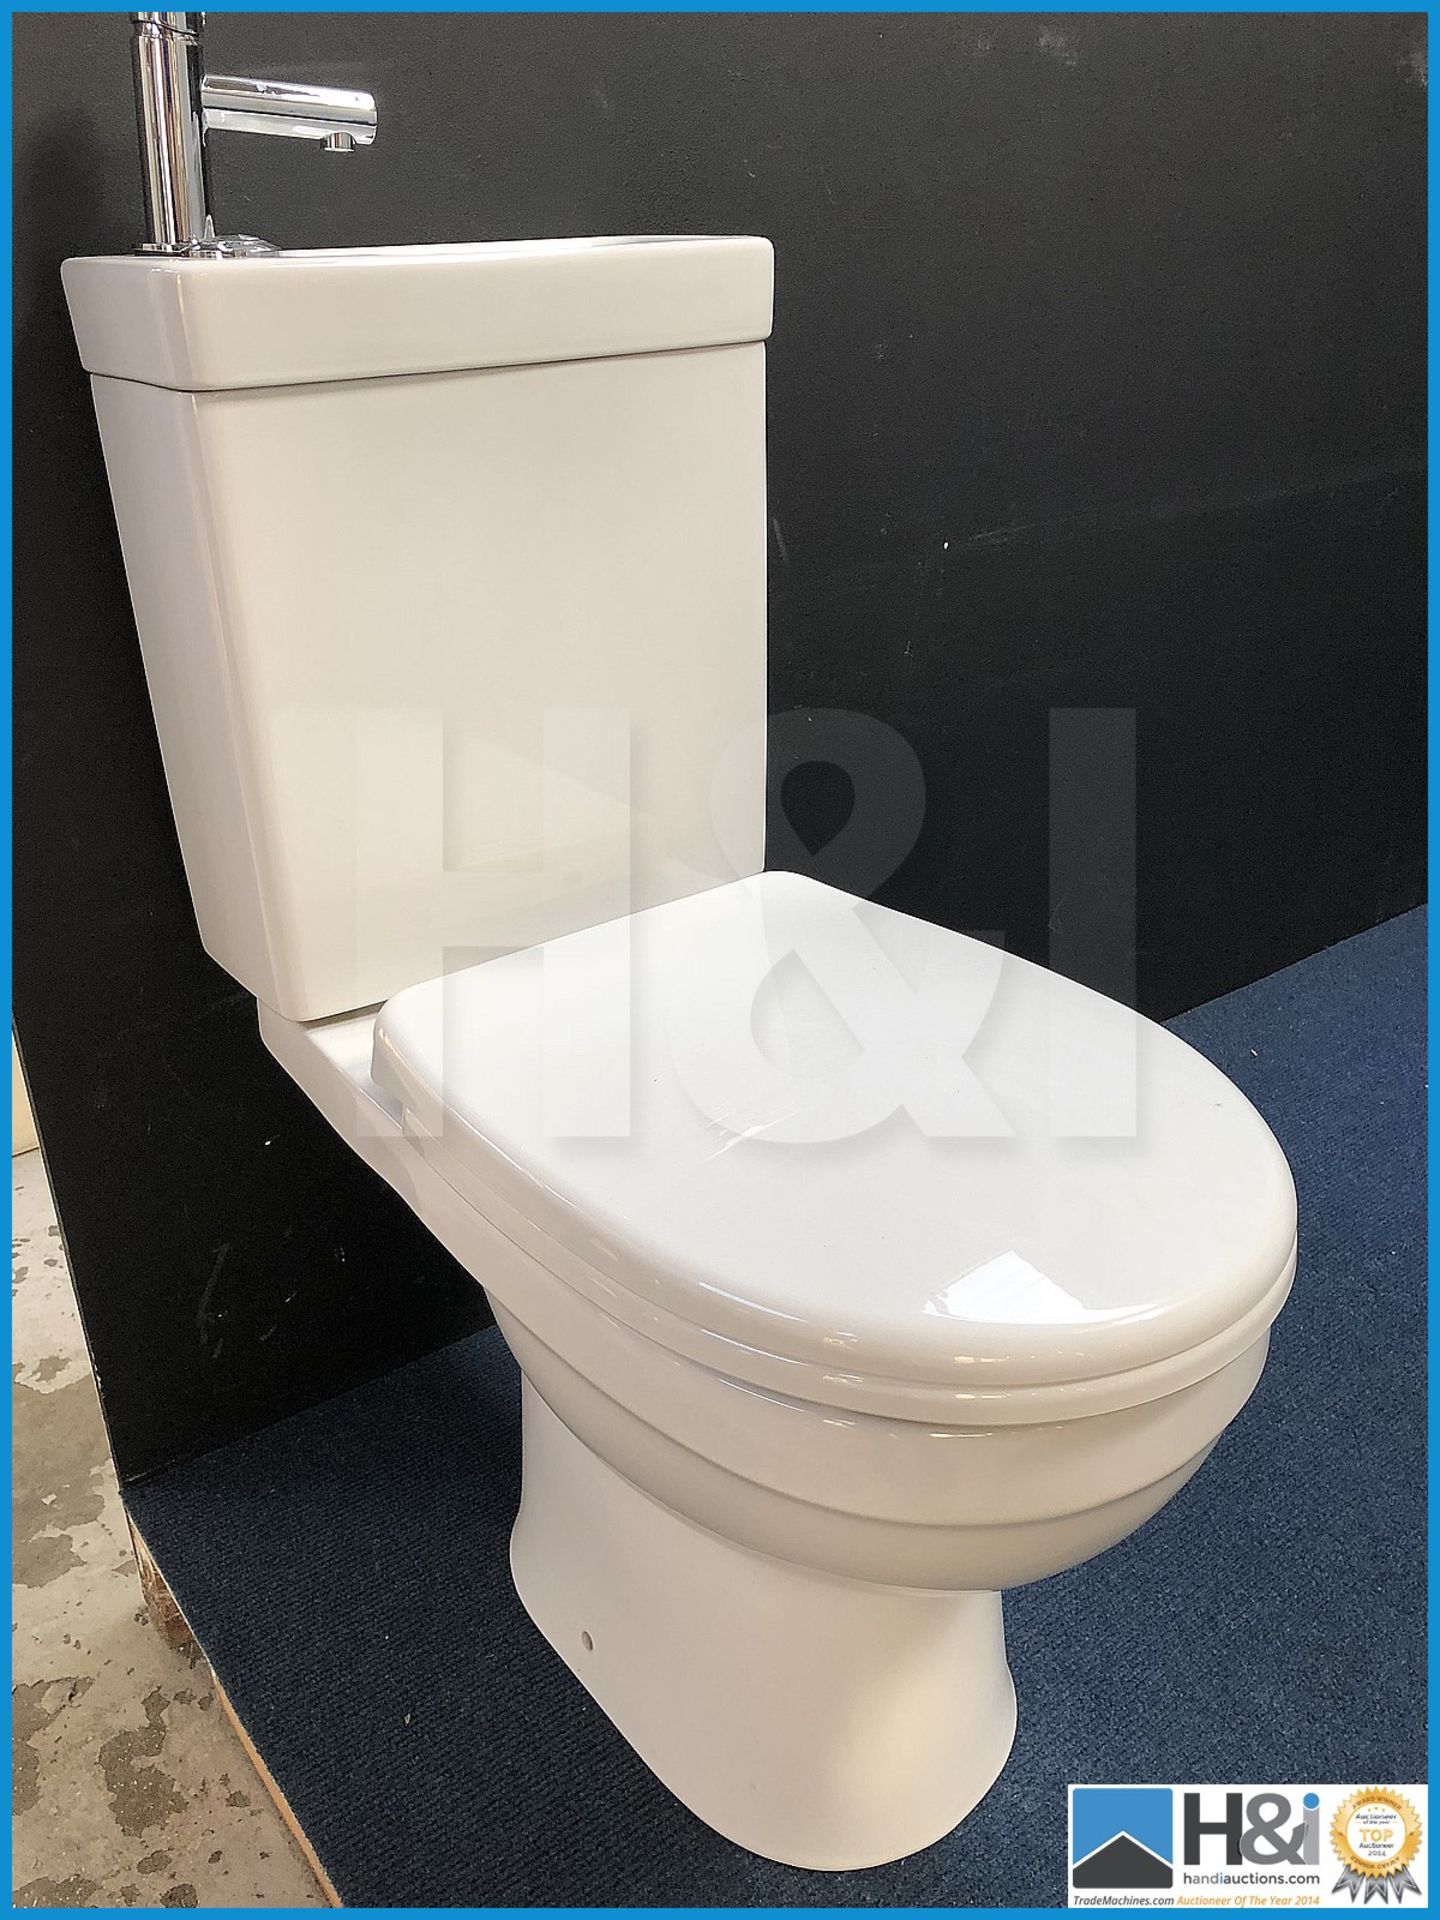 Cooke and Lewis cloakroom toilet complete with insert basin and modern monobloc mixer and click clac - Image 3 of 3